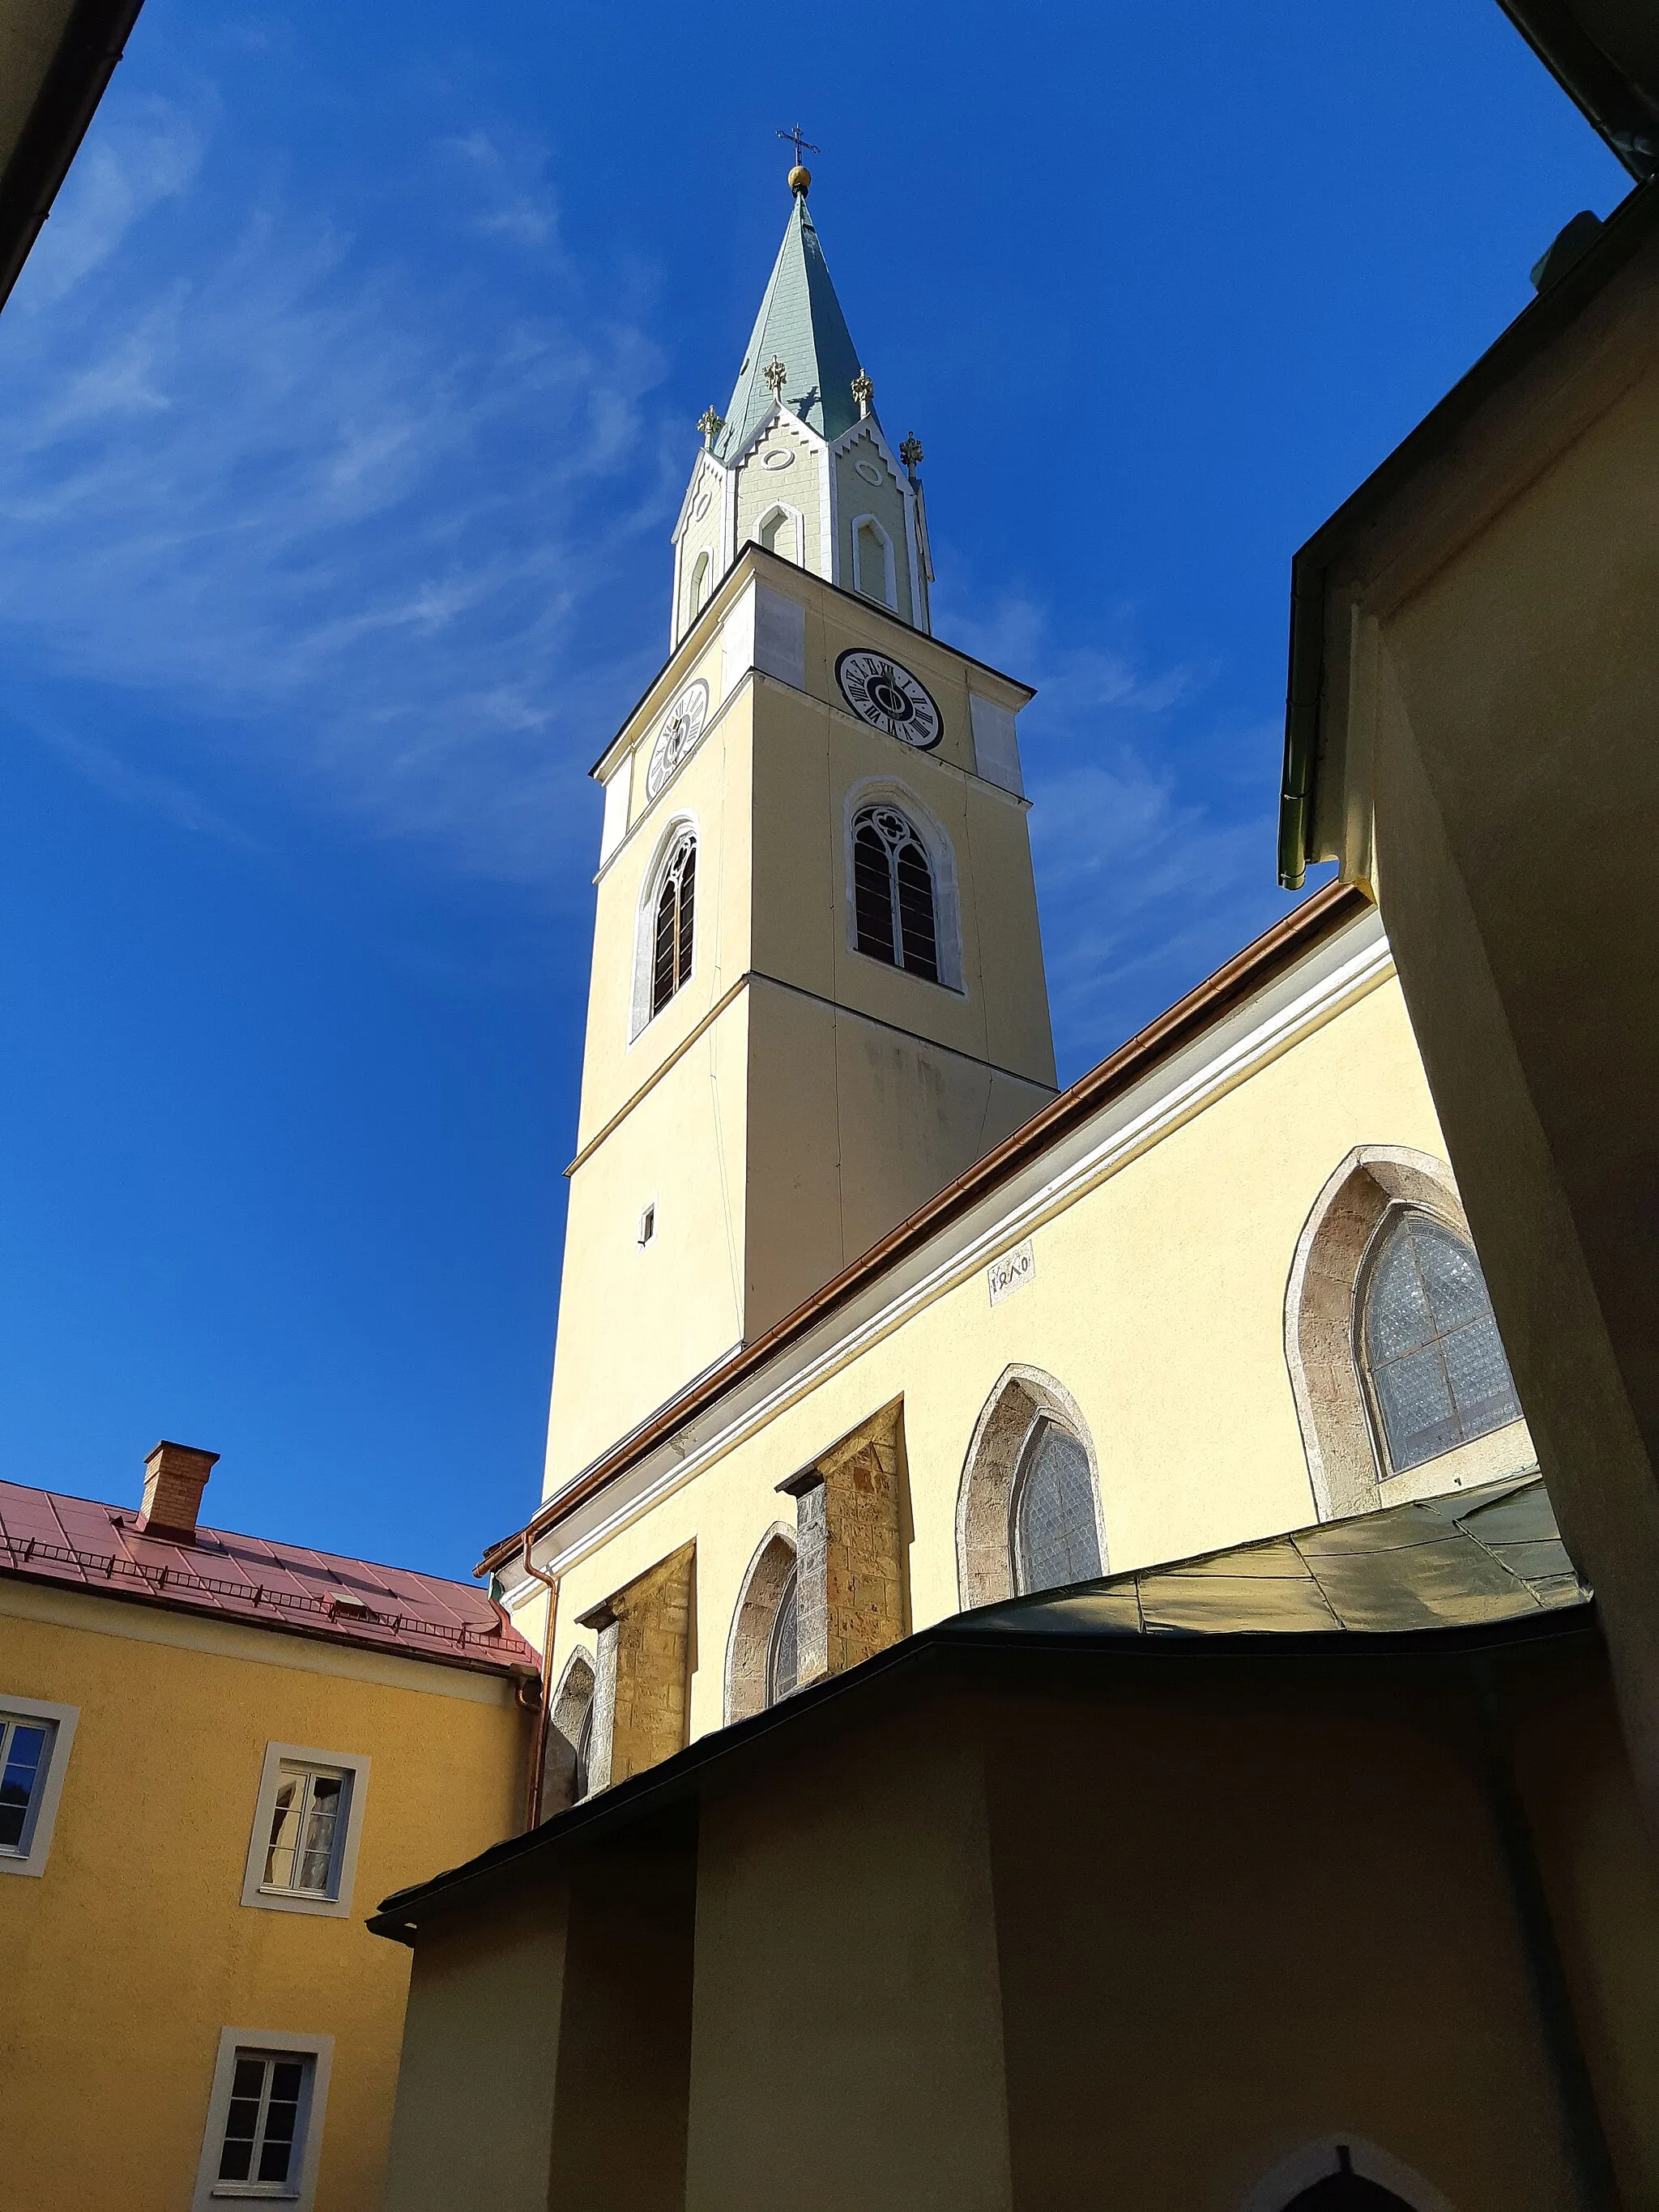 Photo showing: Parish church of St. Nikolaus in the municipality of Rottenmann in Styria, Austria.